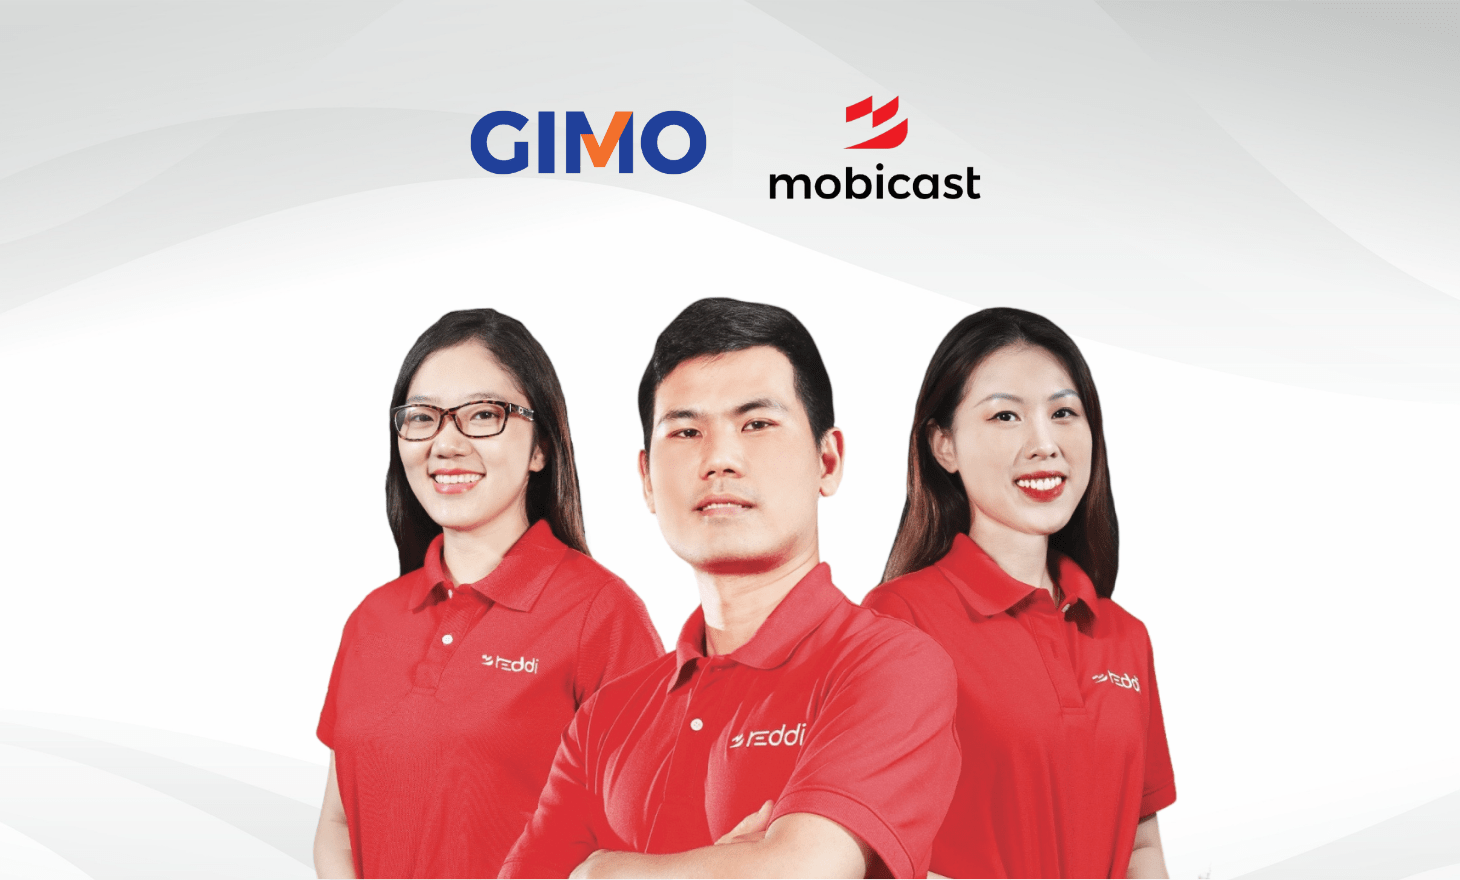 GIMO x Mobicast: Enhancing Employees’ Welfare With An On-demand Payment Platform